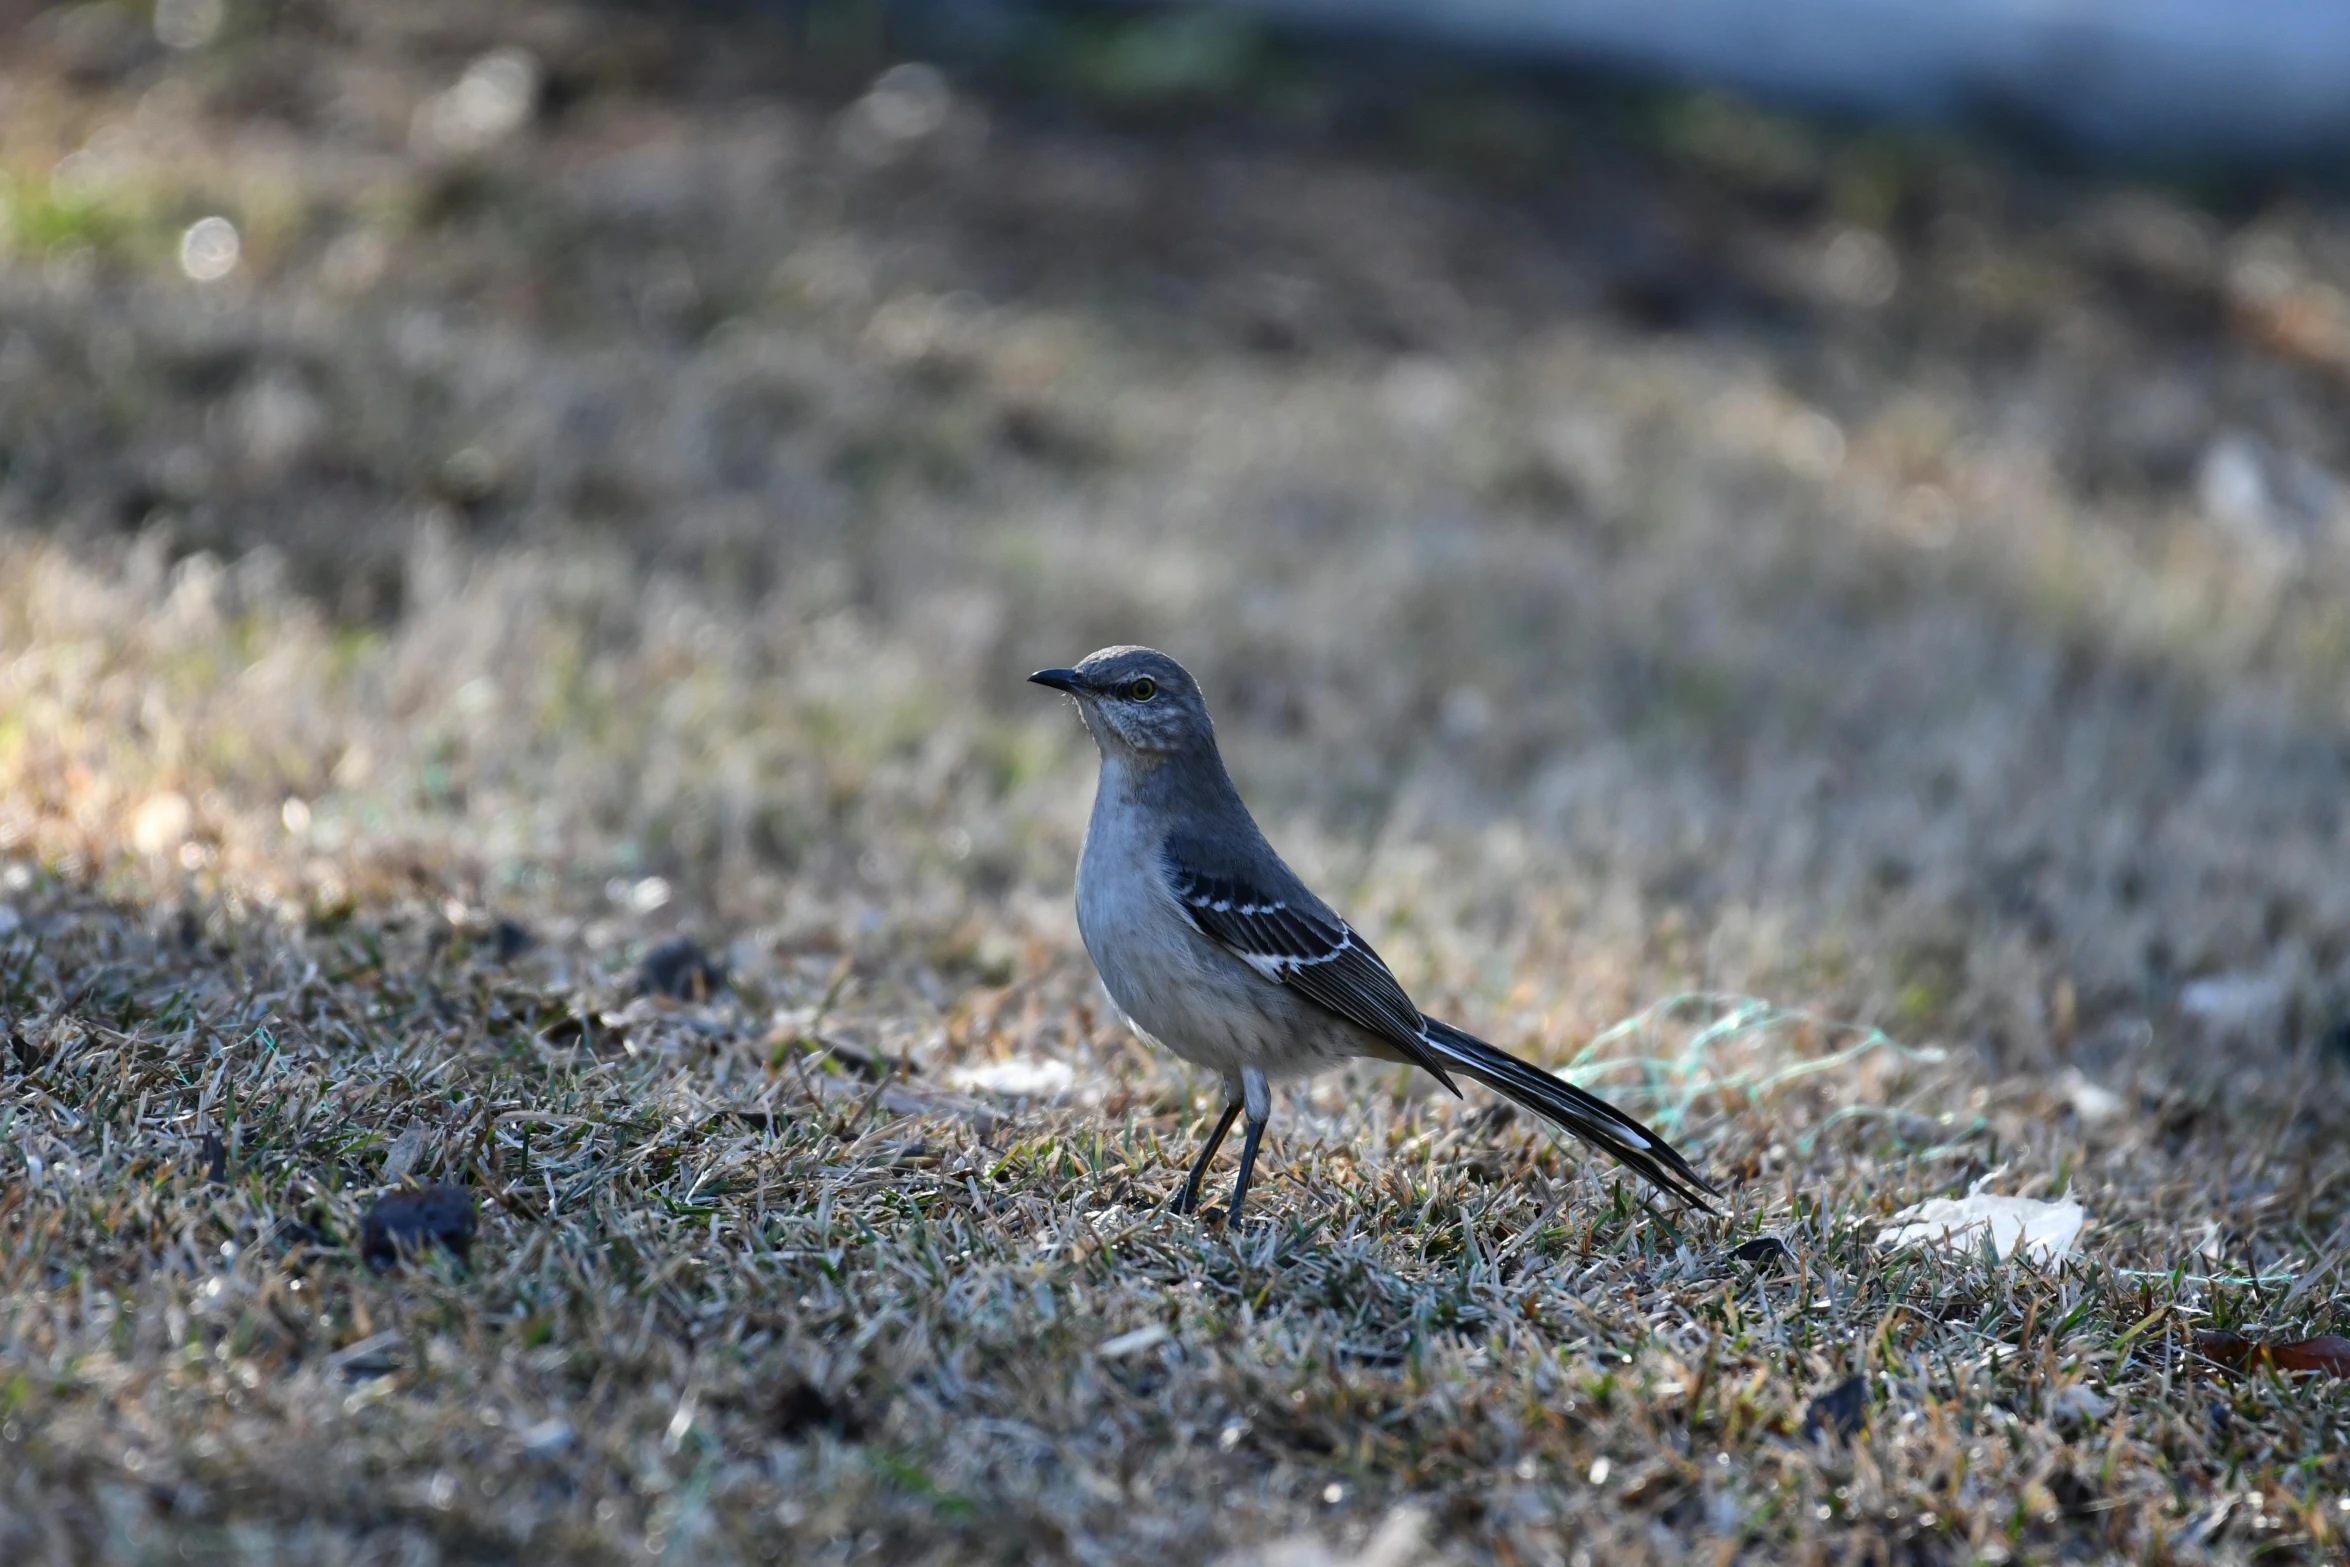 a bird with an ear flap standing on the ground